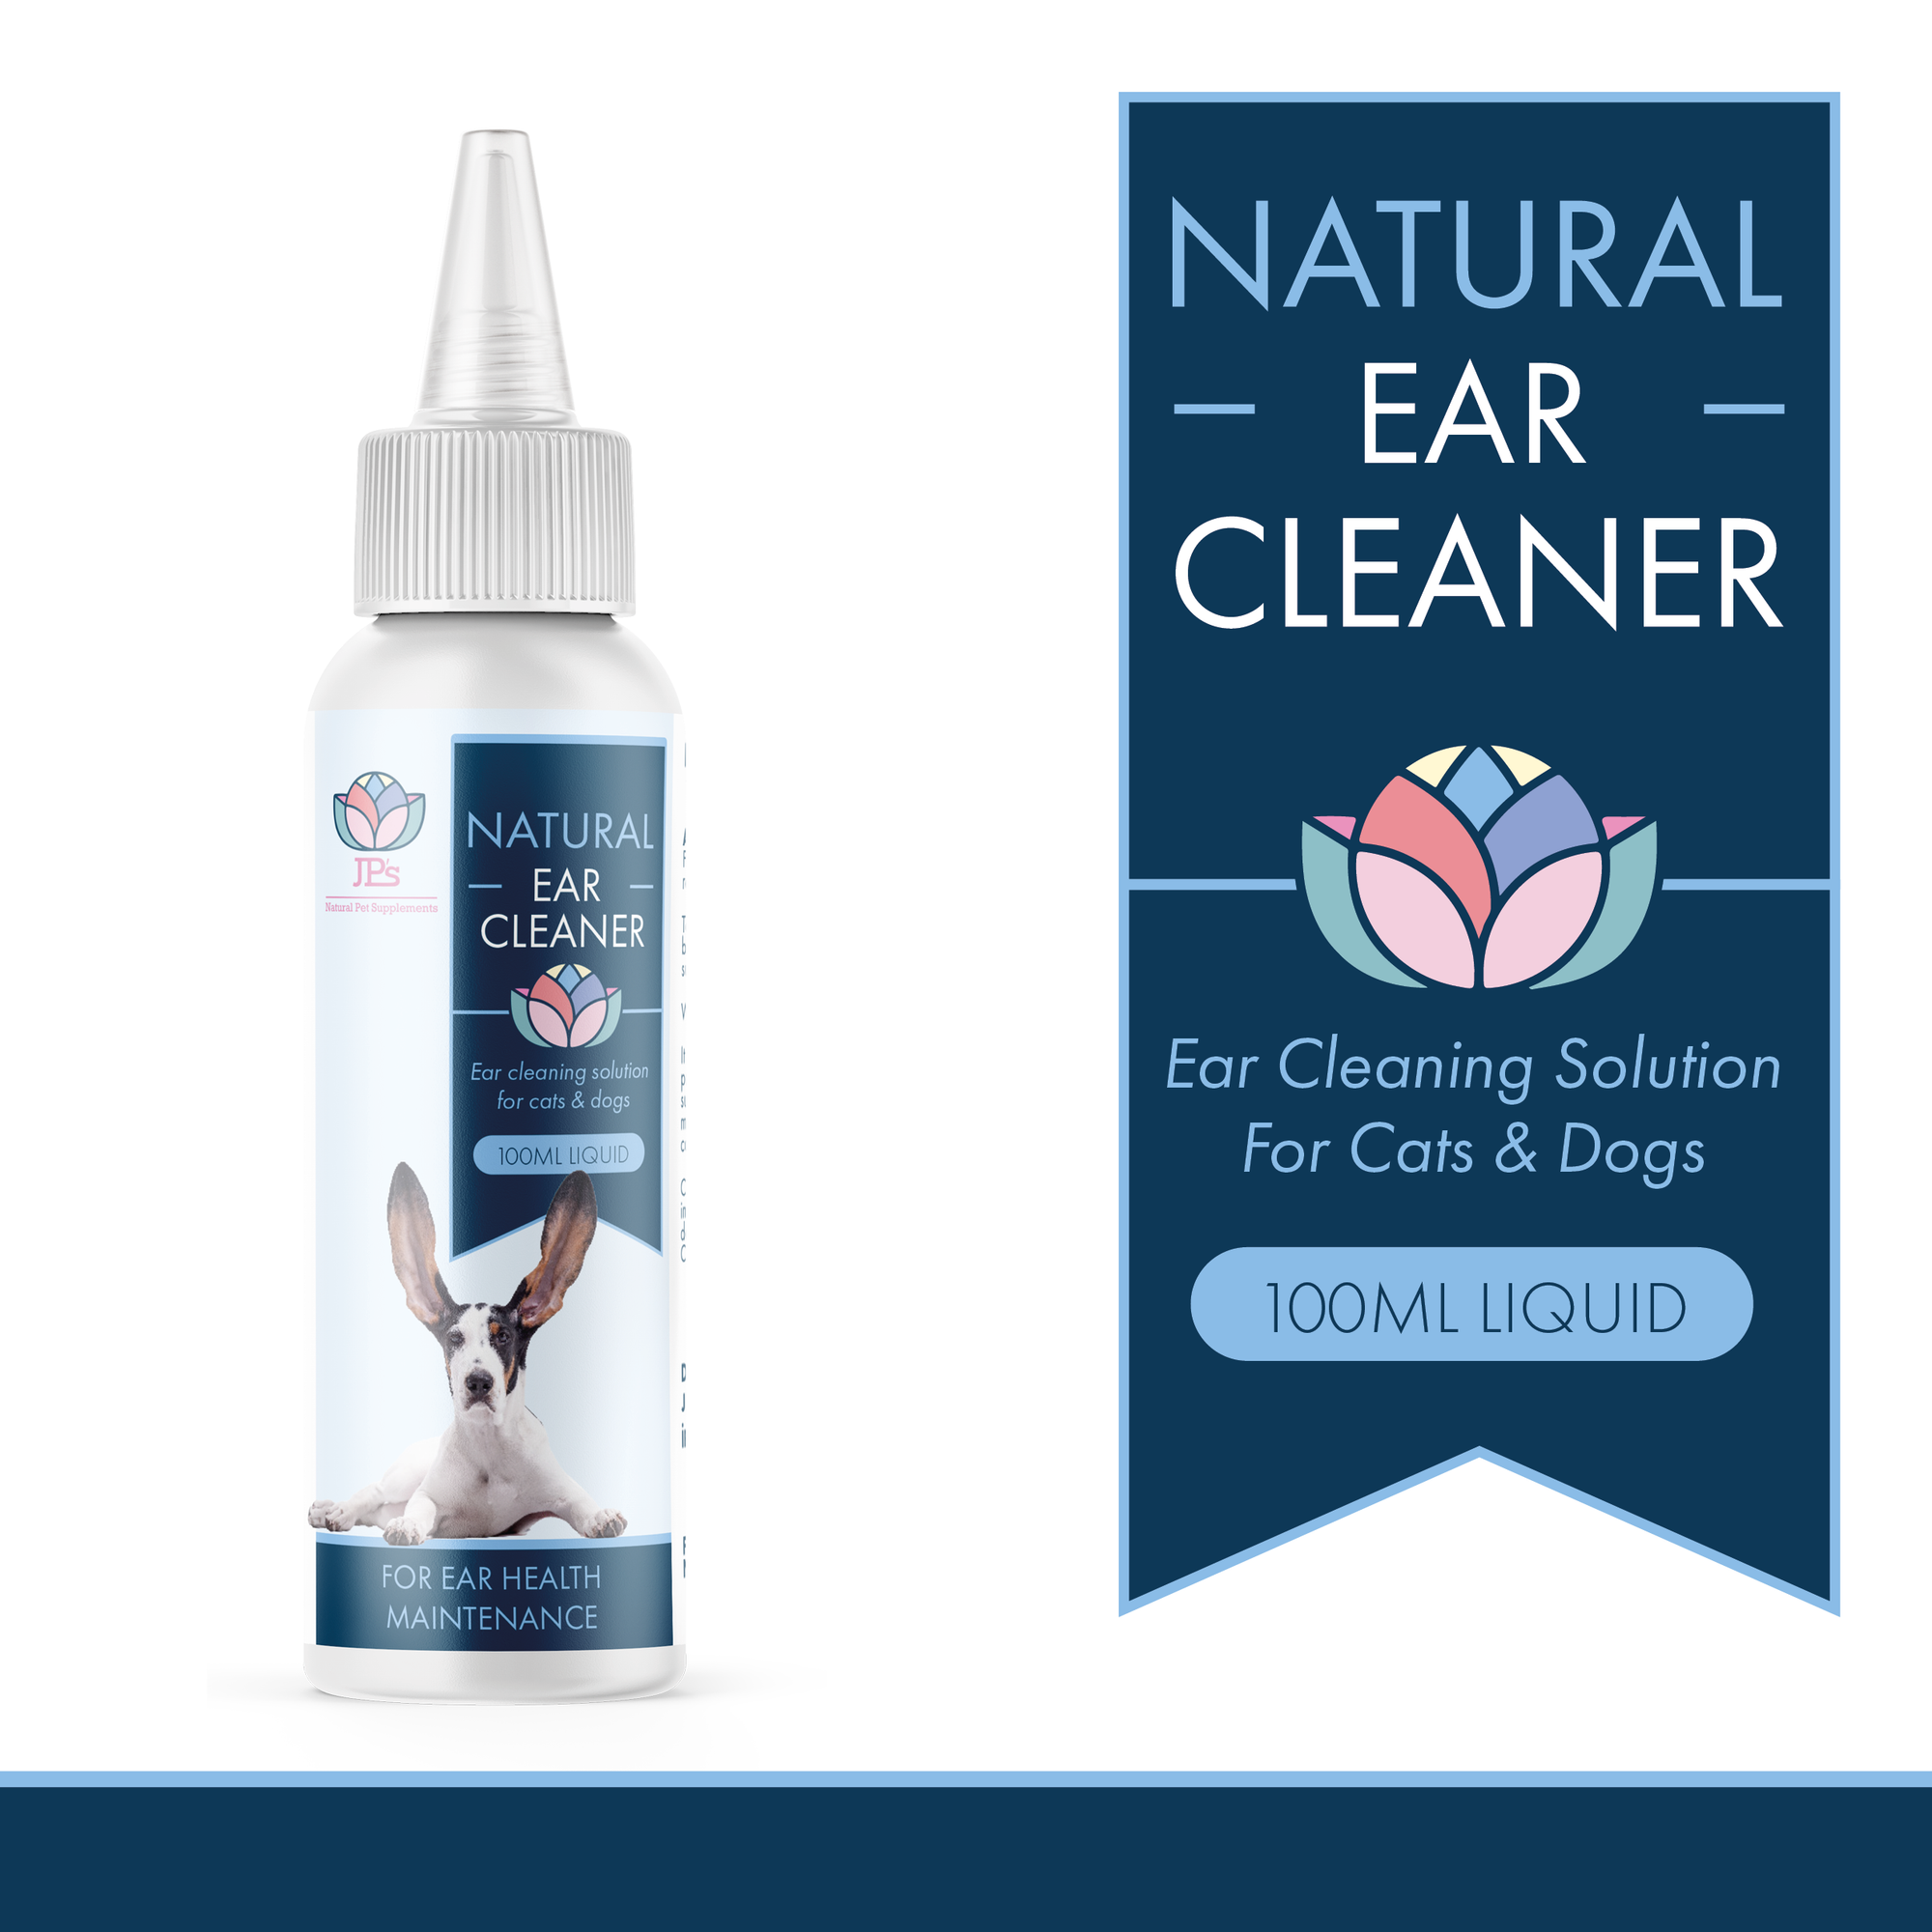 Natural ear cleaner for cats & dogs